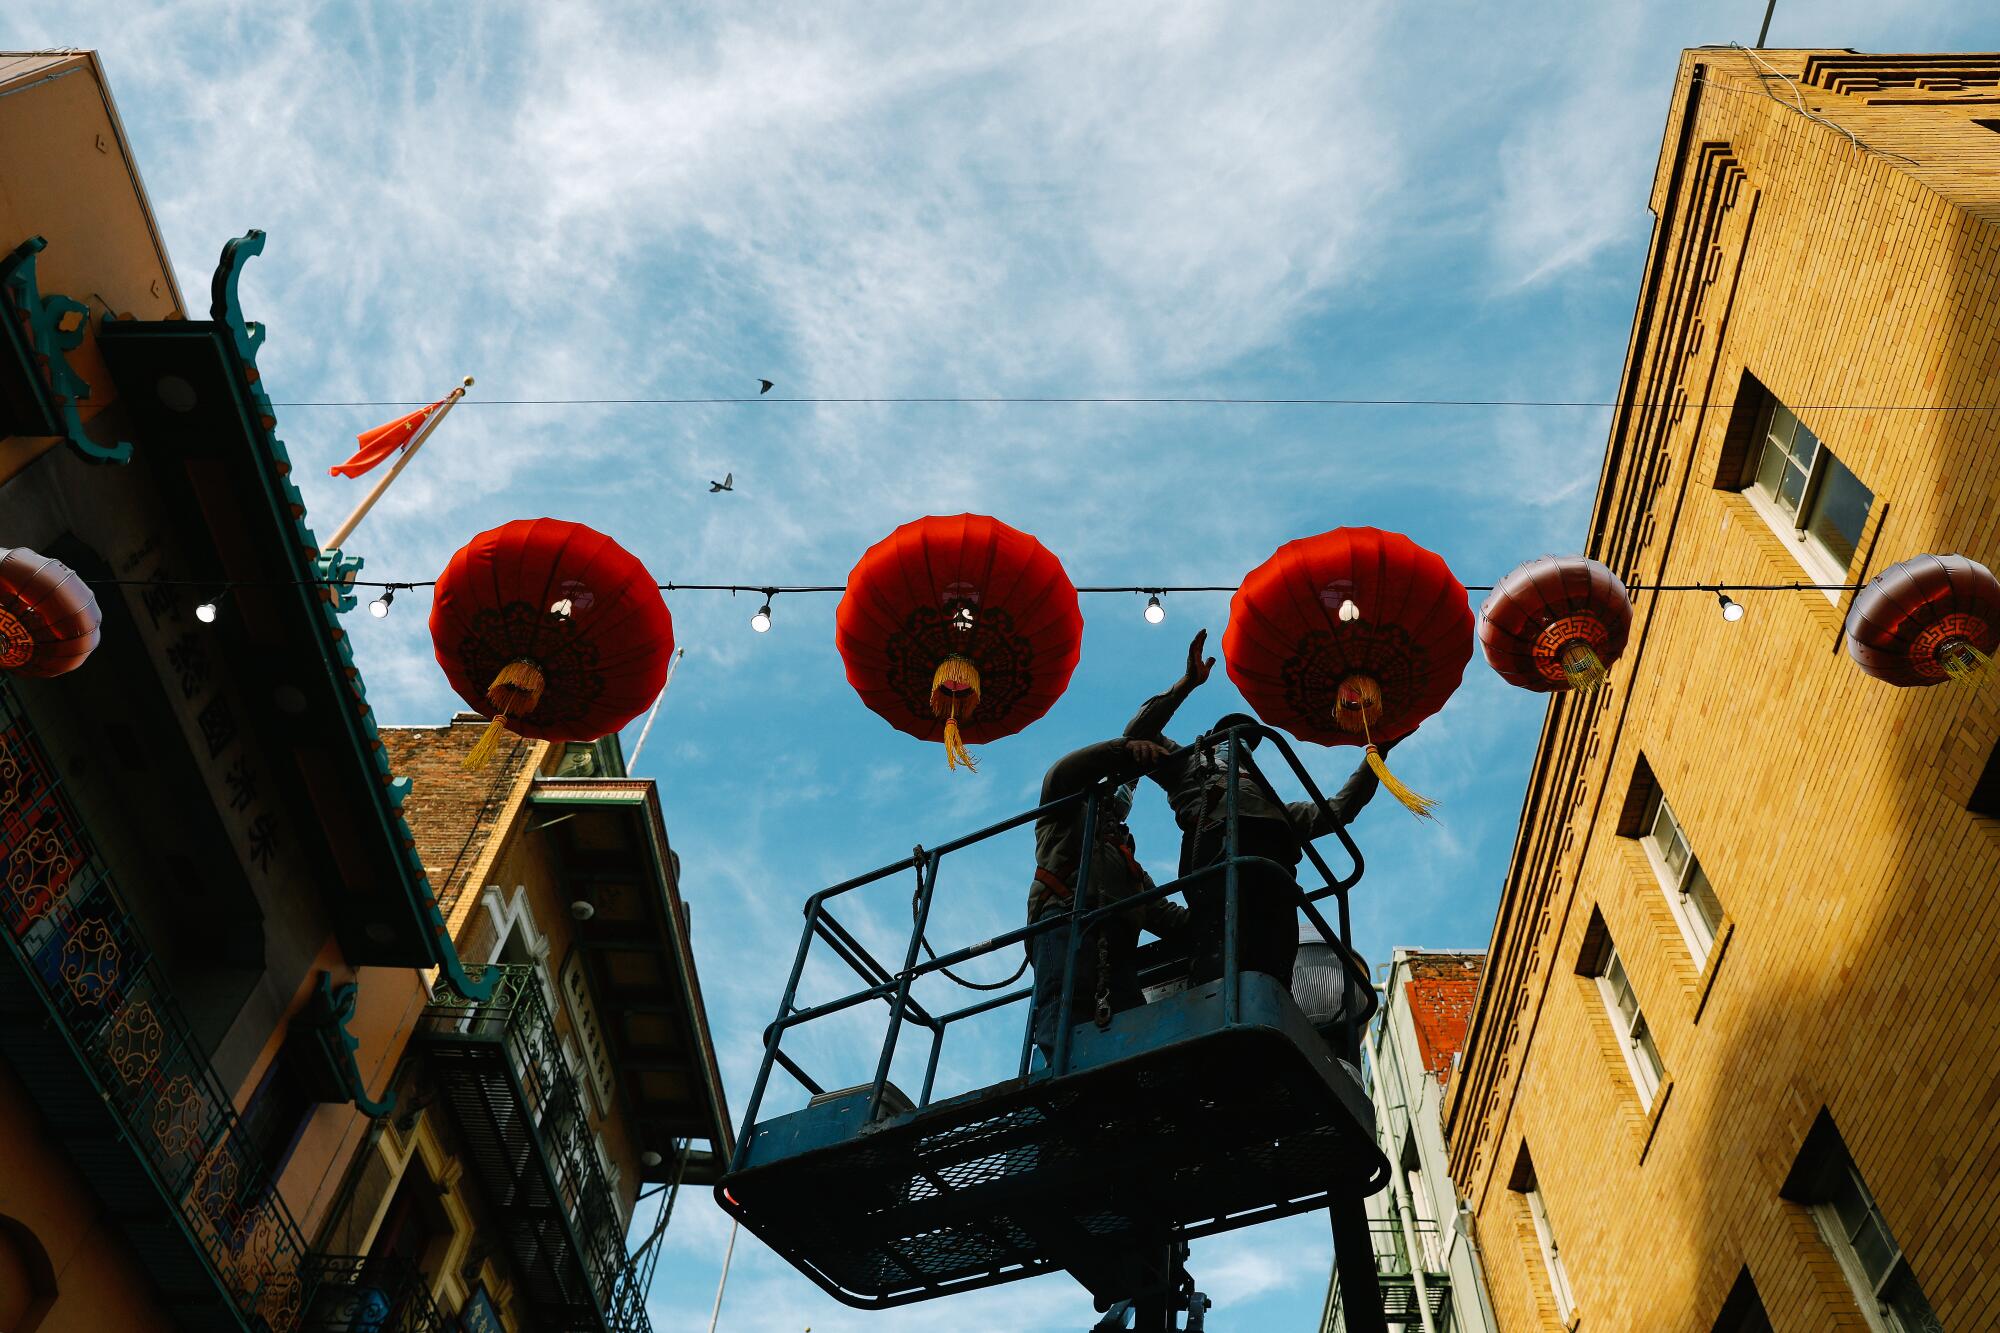 Workers hang red lanterns above a street.